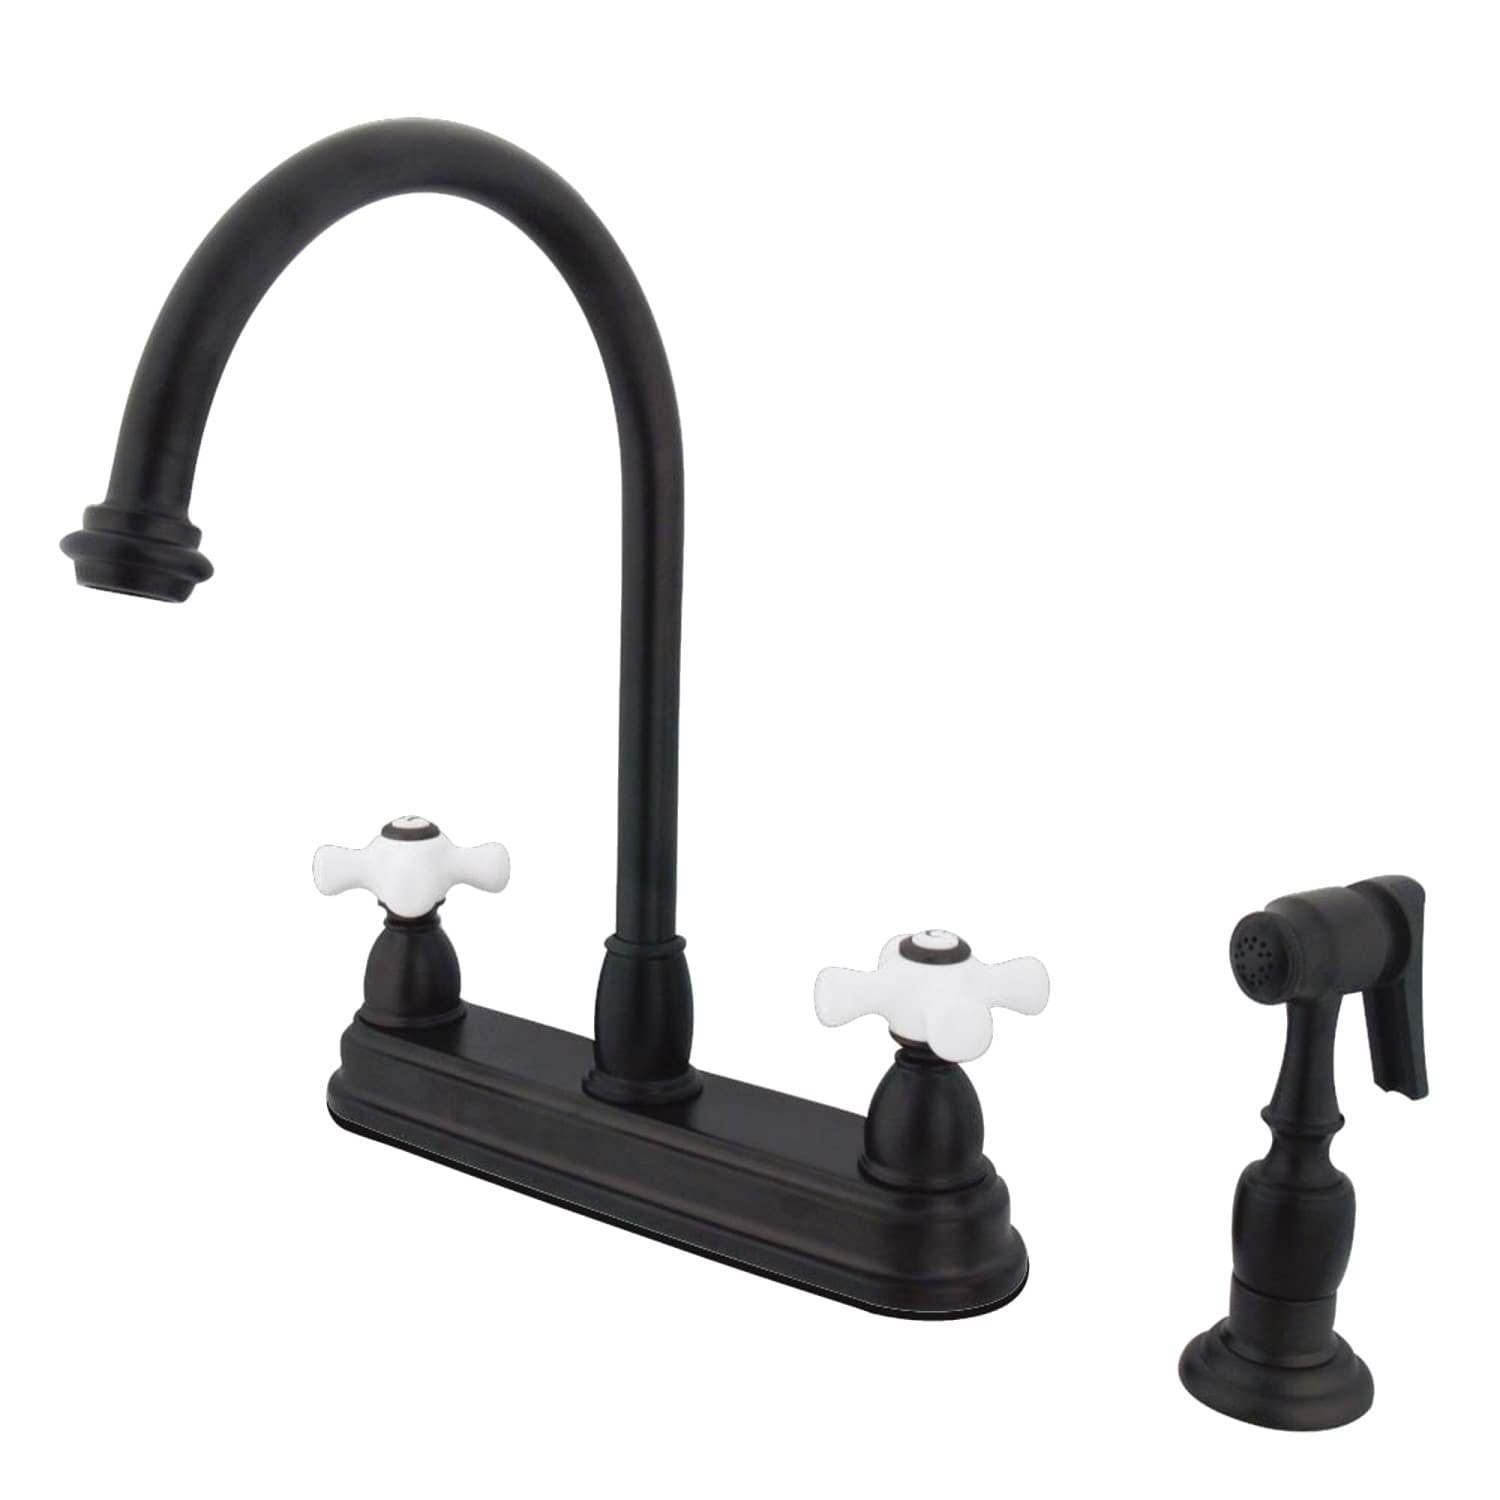 Chicago Oil-Rubbed Bronze Double Handle High-arc Kitchen Faucet with Deck Plate and Side Spray Included | - Elements of Design EB3755PXBS